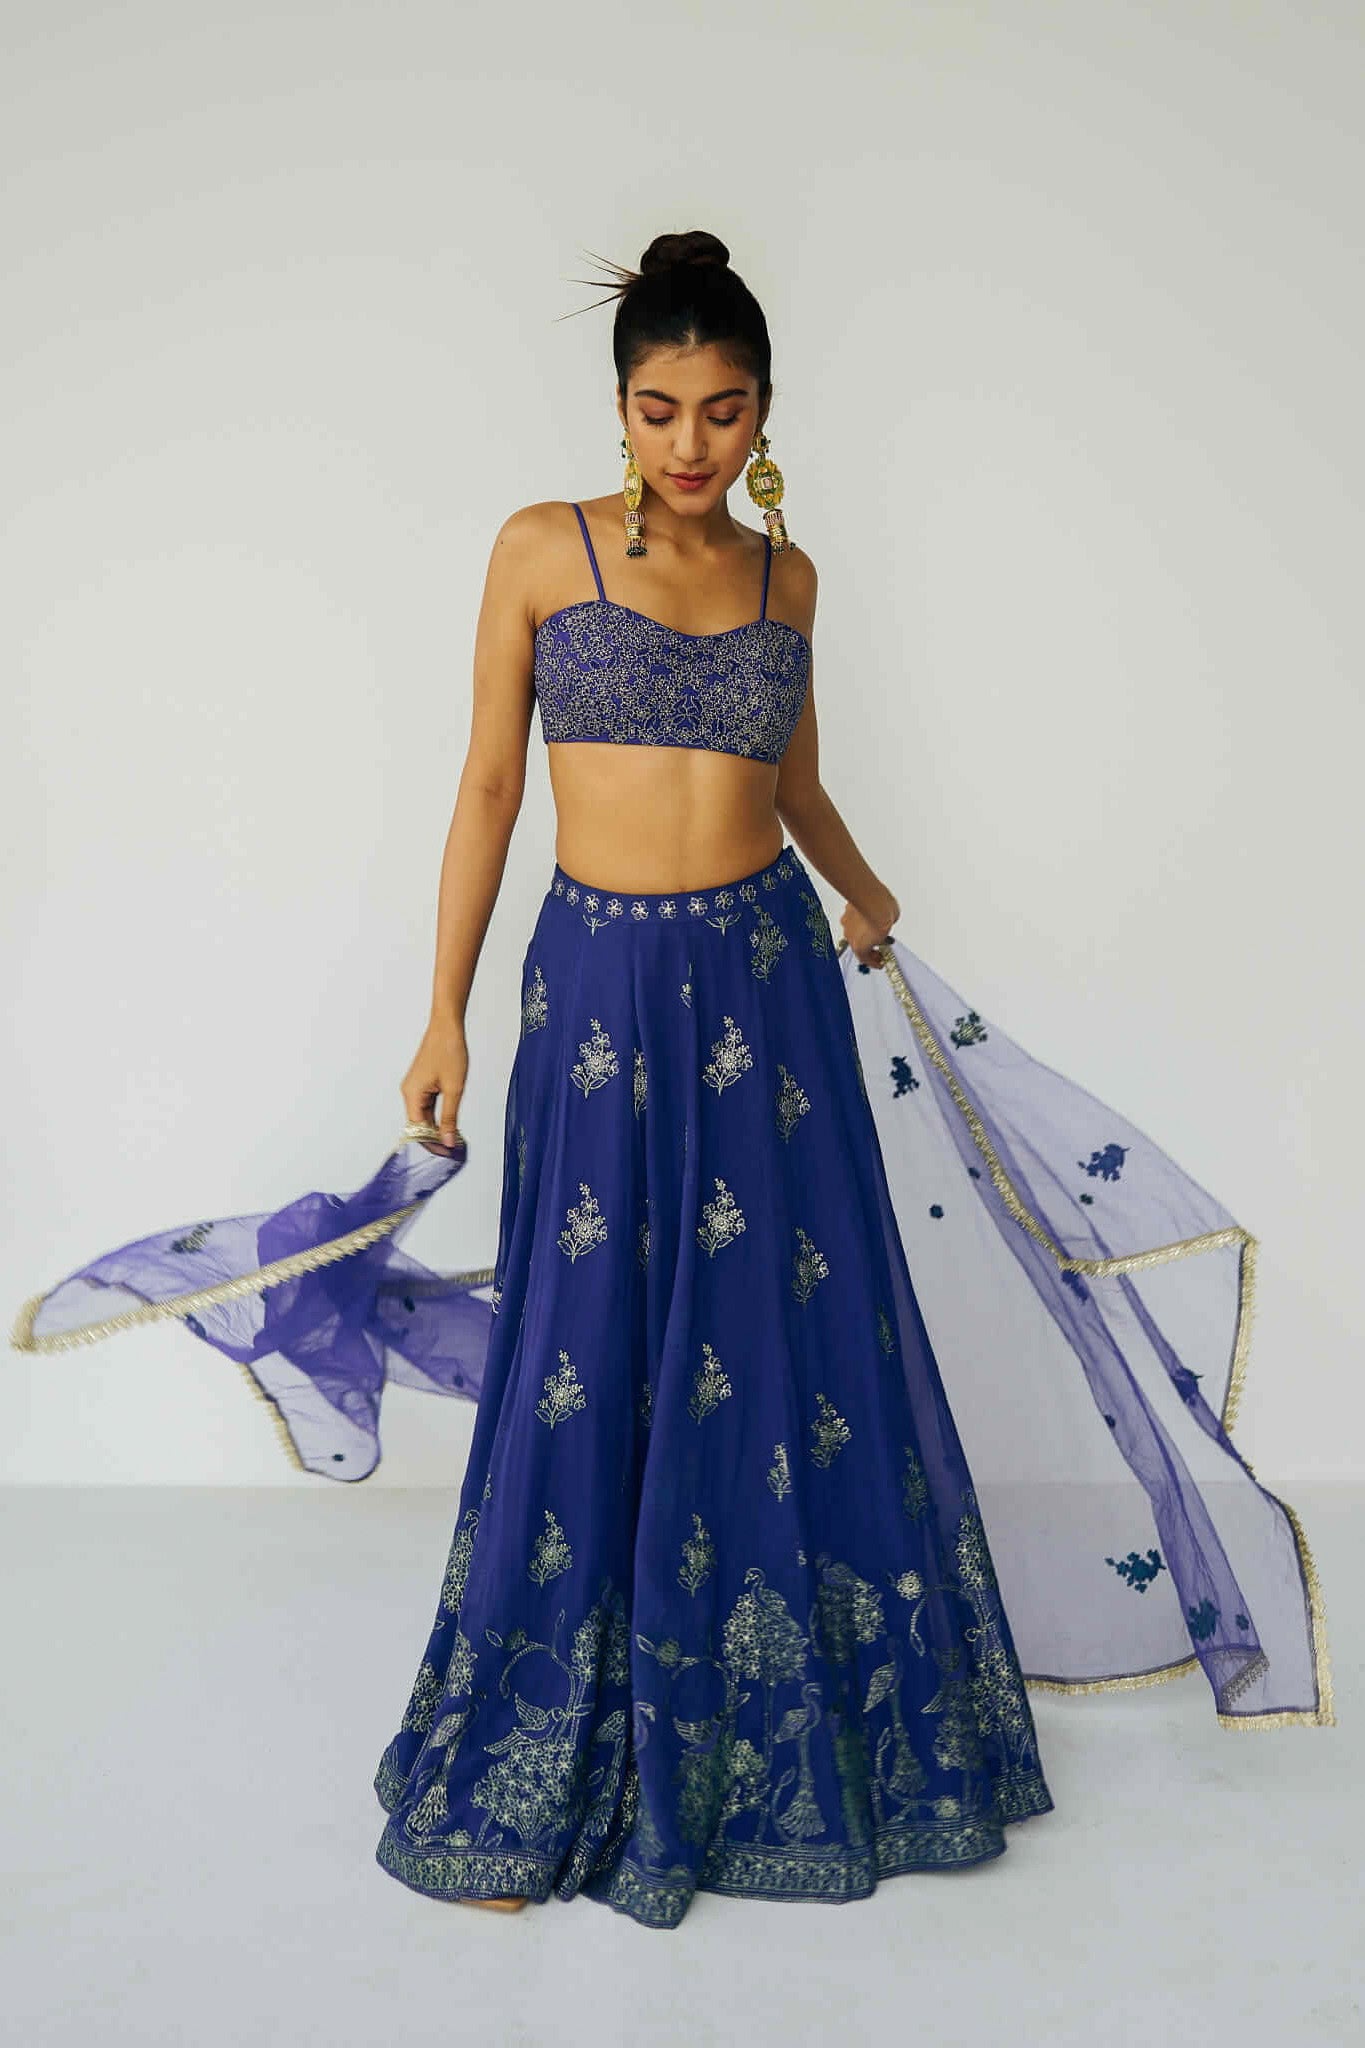 A woman wearing a bright blue embroidered top and skirt with an embroidered dupatta.